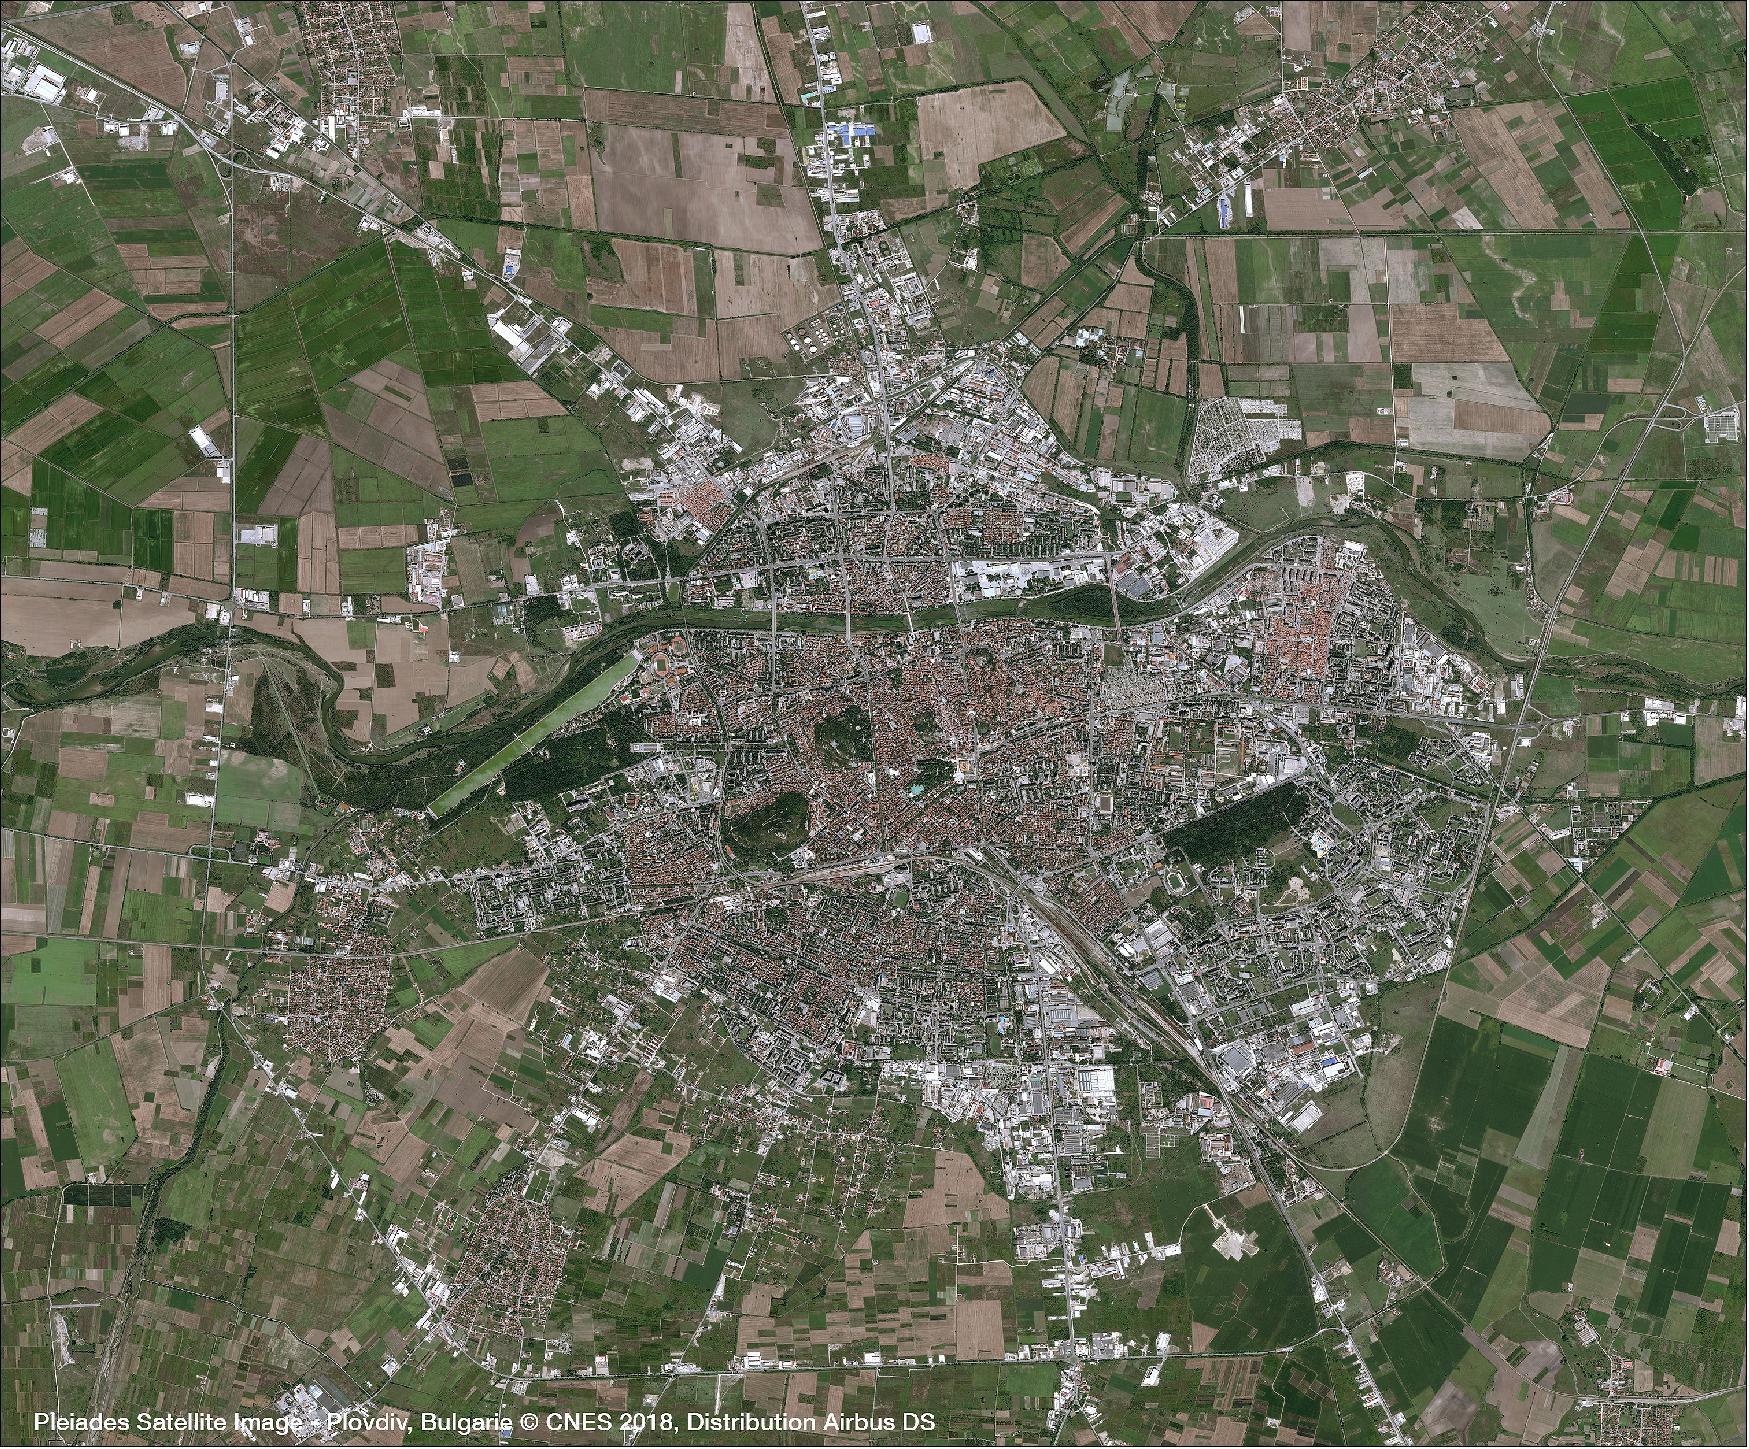 Figure 14: Pleiades image of Plovdiv, Bulgaria observed on 21 July 2018. As Bulgaria's oldest city, Plovdiv has been officially inaugurated as the 2019 European Capital of Culture - next to Matera of Italy (image credit: CNES, distribution by Airbus DS)